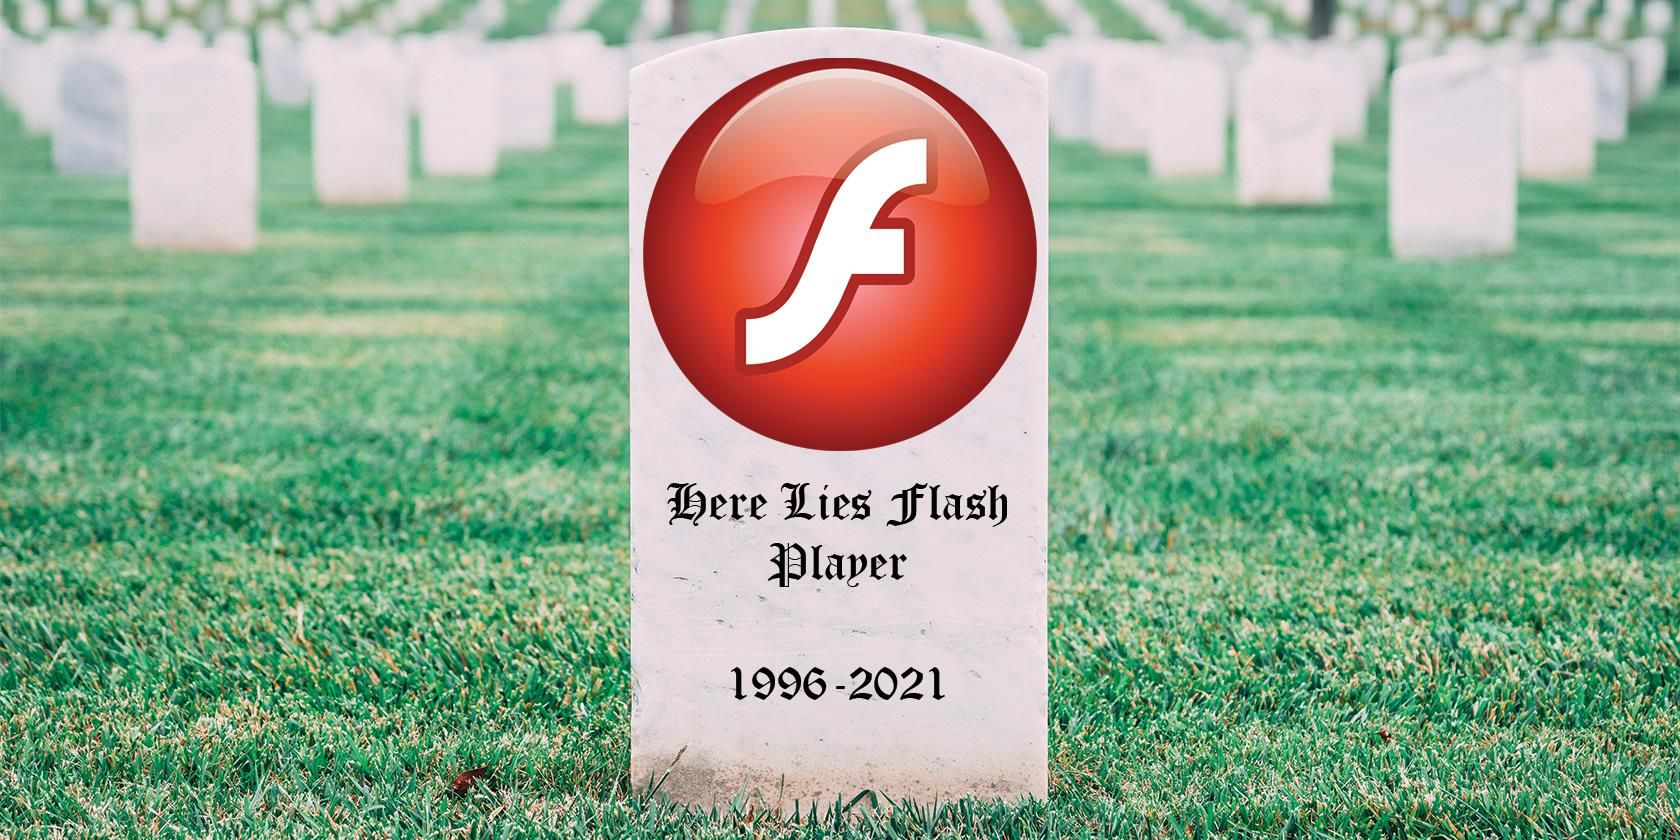 4 Ways to Play Adobe Flash Games Without Flash